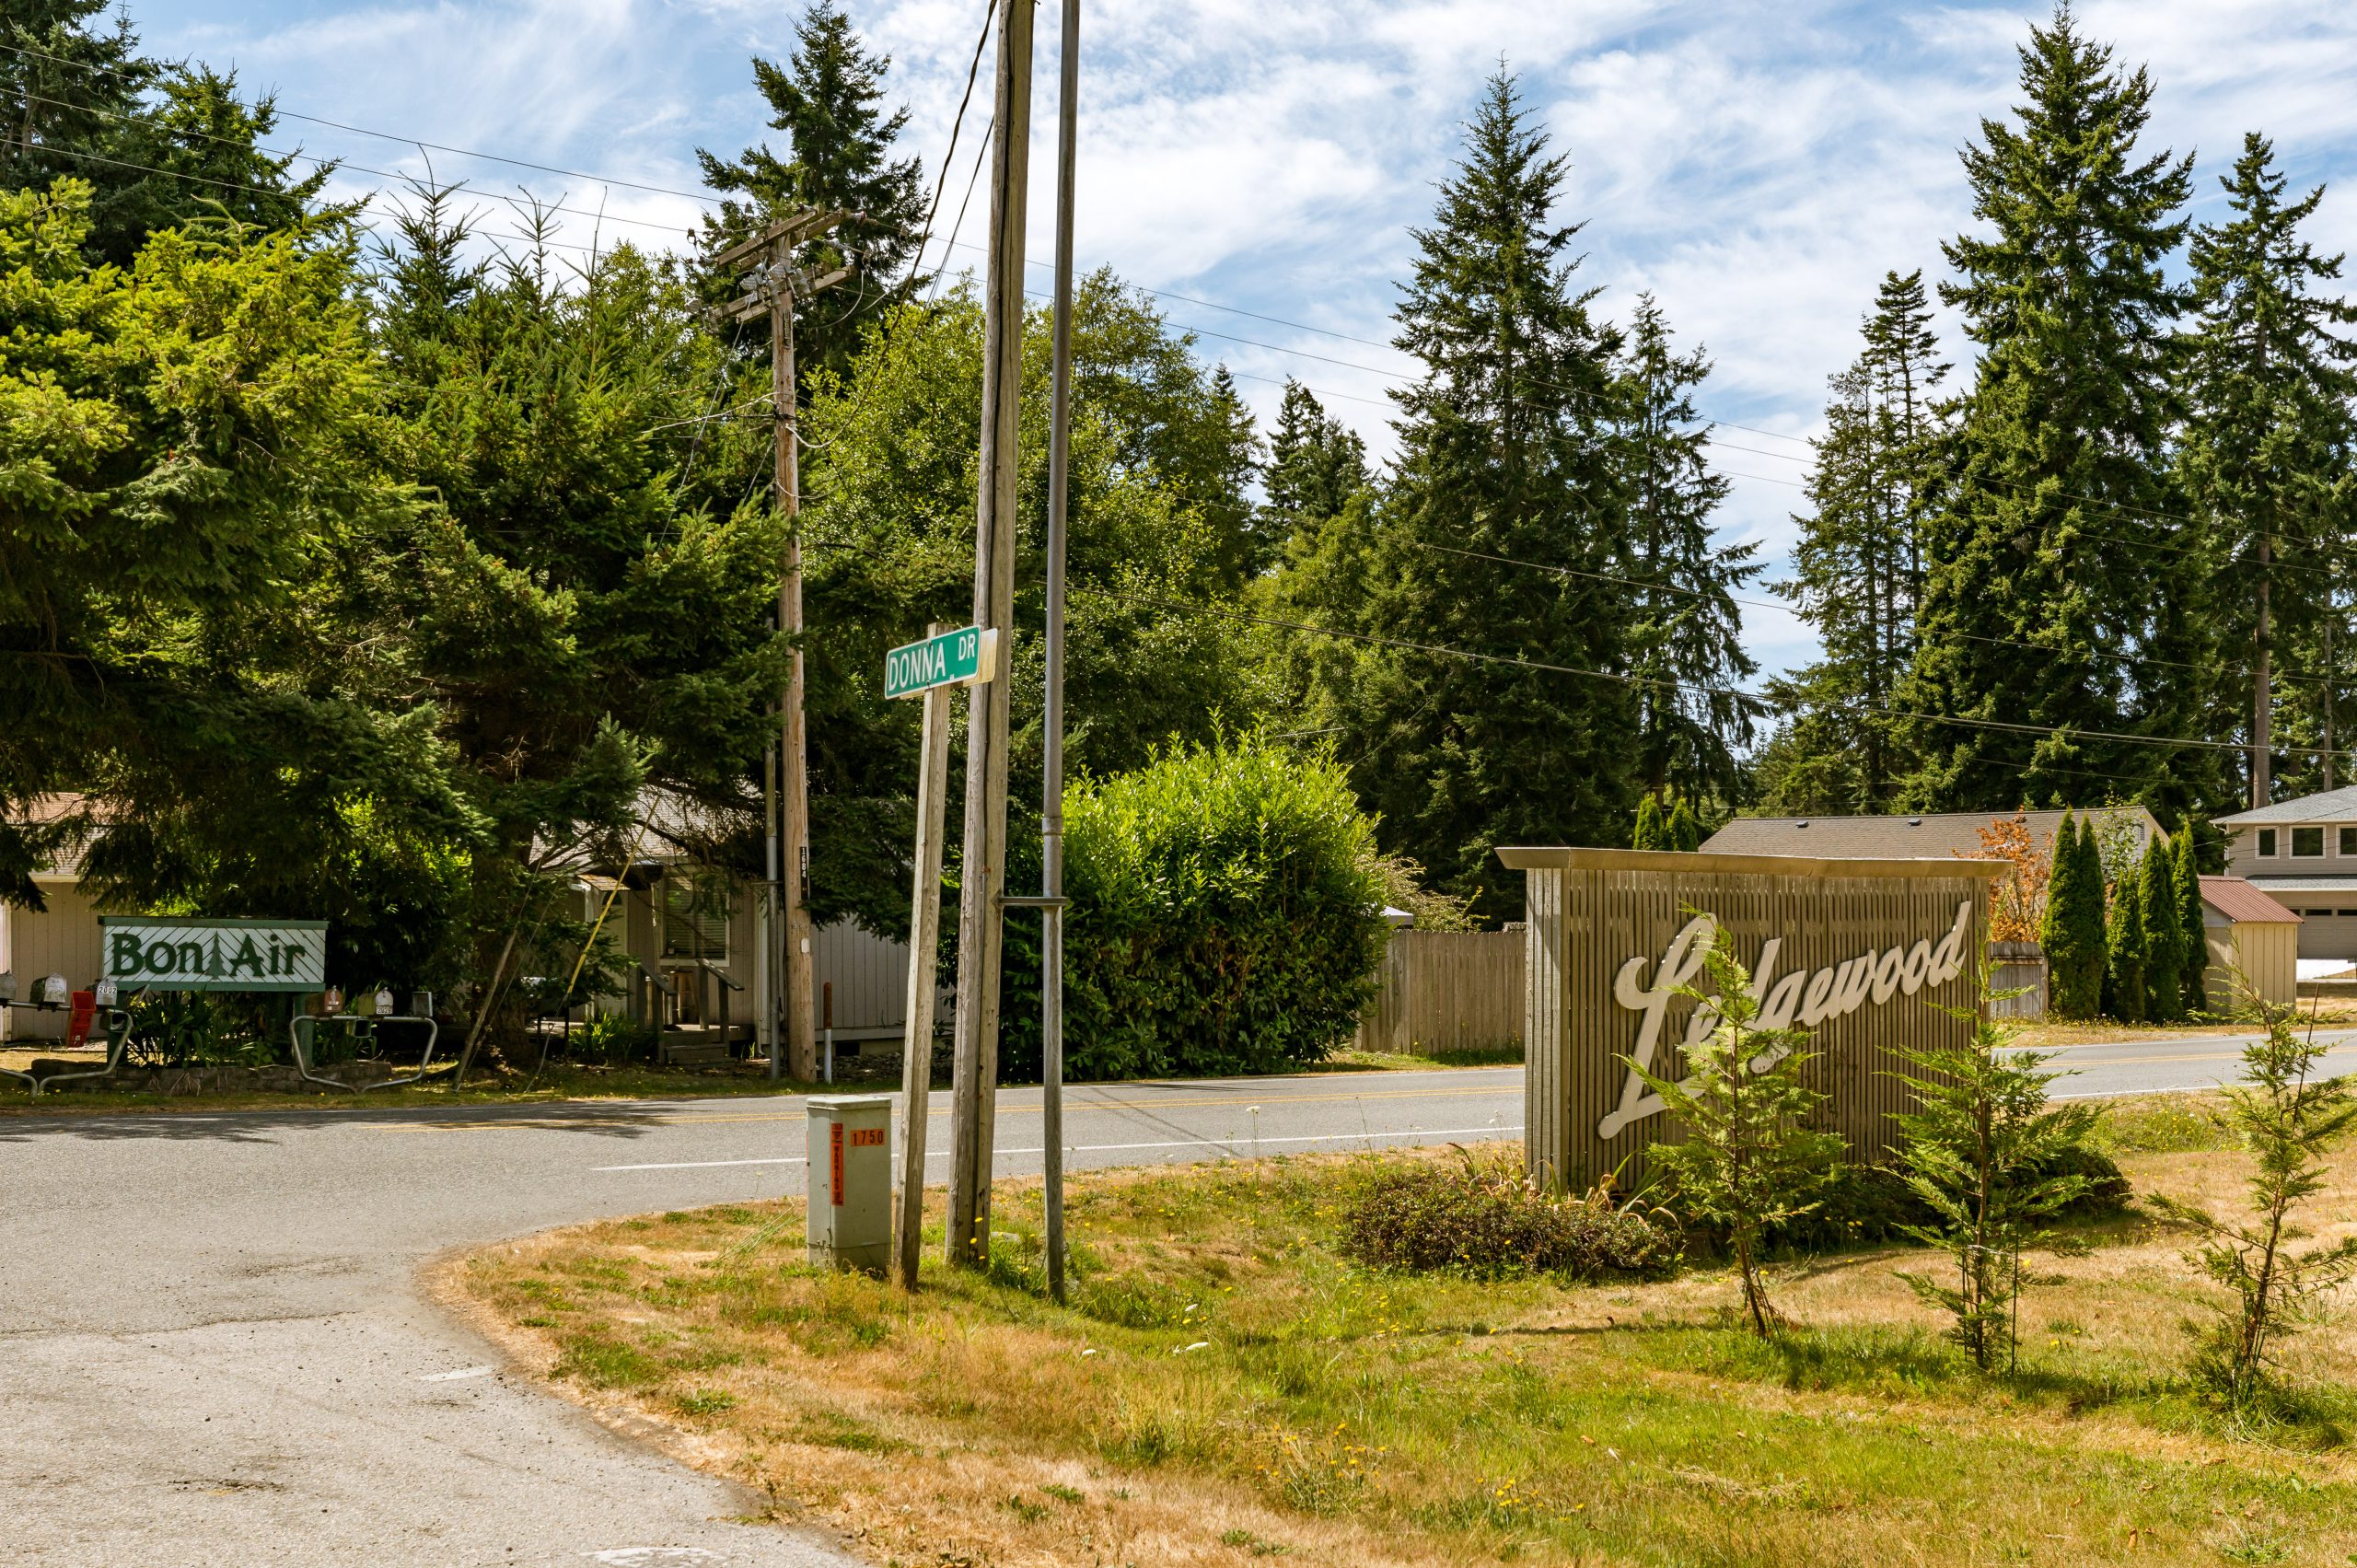 Ledgewood and Bon Air, Whidbey Island, Neighborhoods, Welcome, Windermere South Whidbey, Realtors, Whidbey Real Estate, homes, homes for sale, homes listed